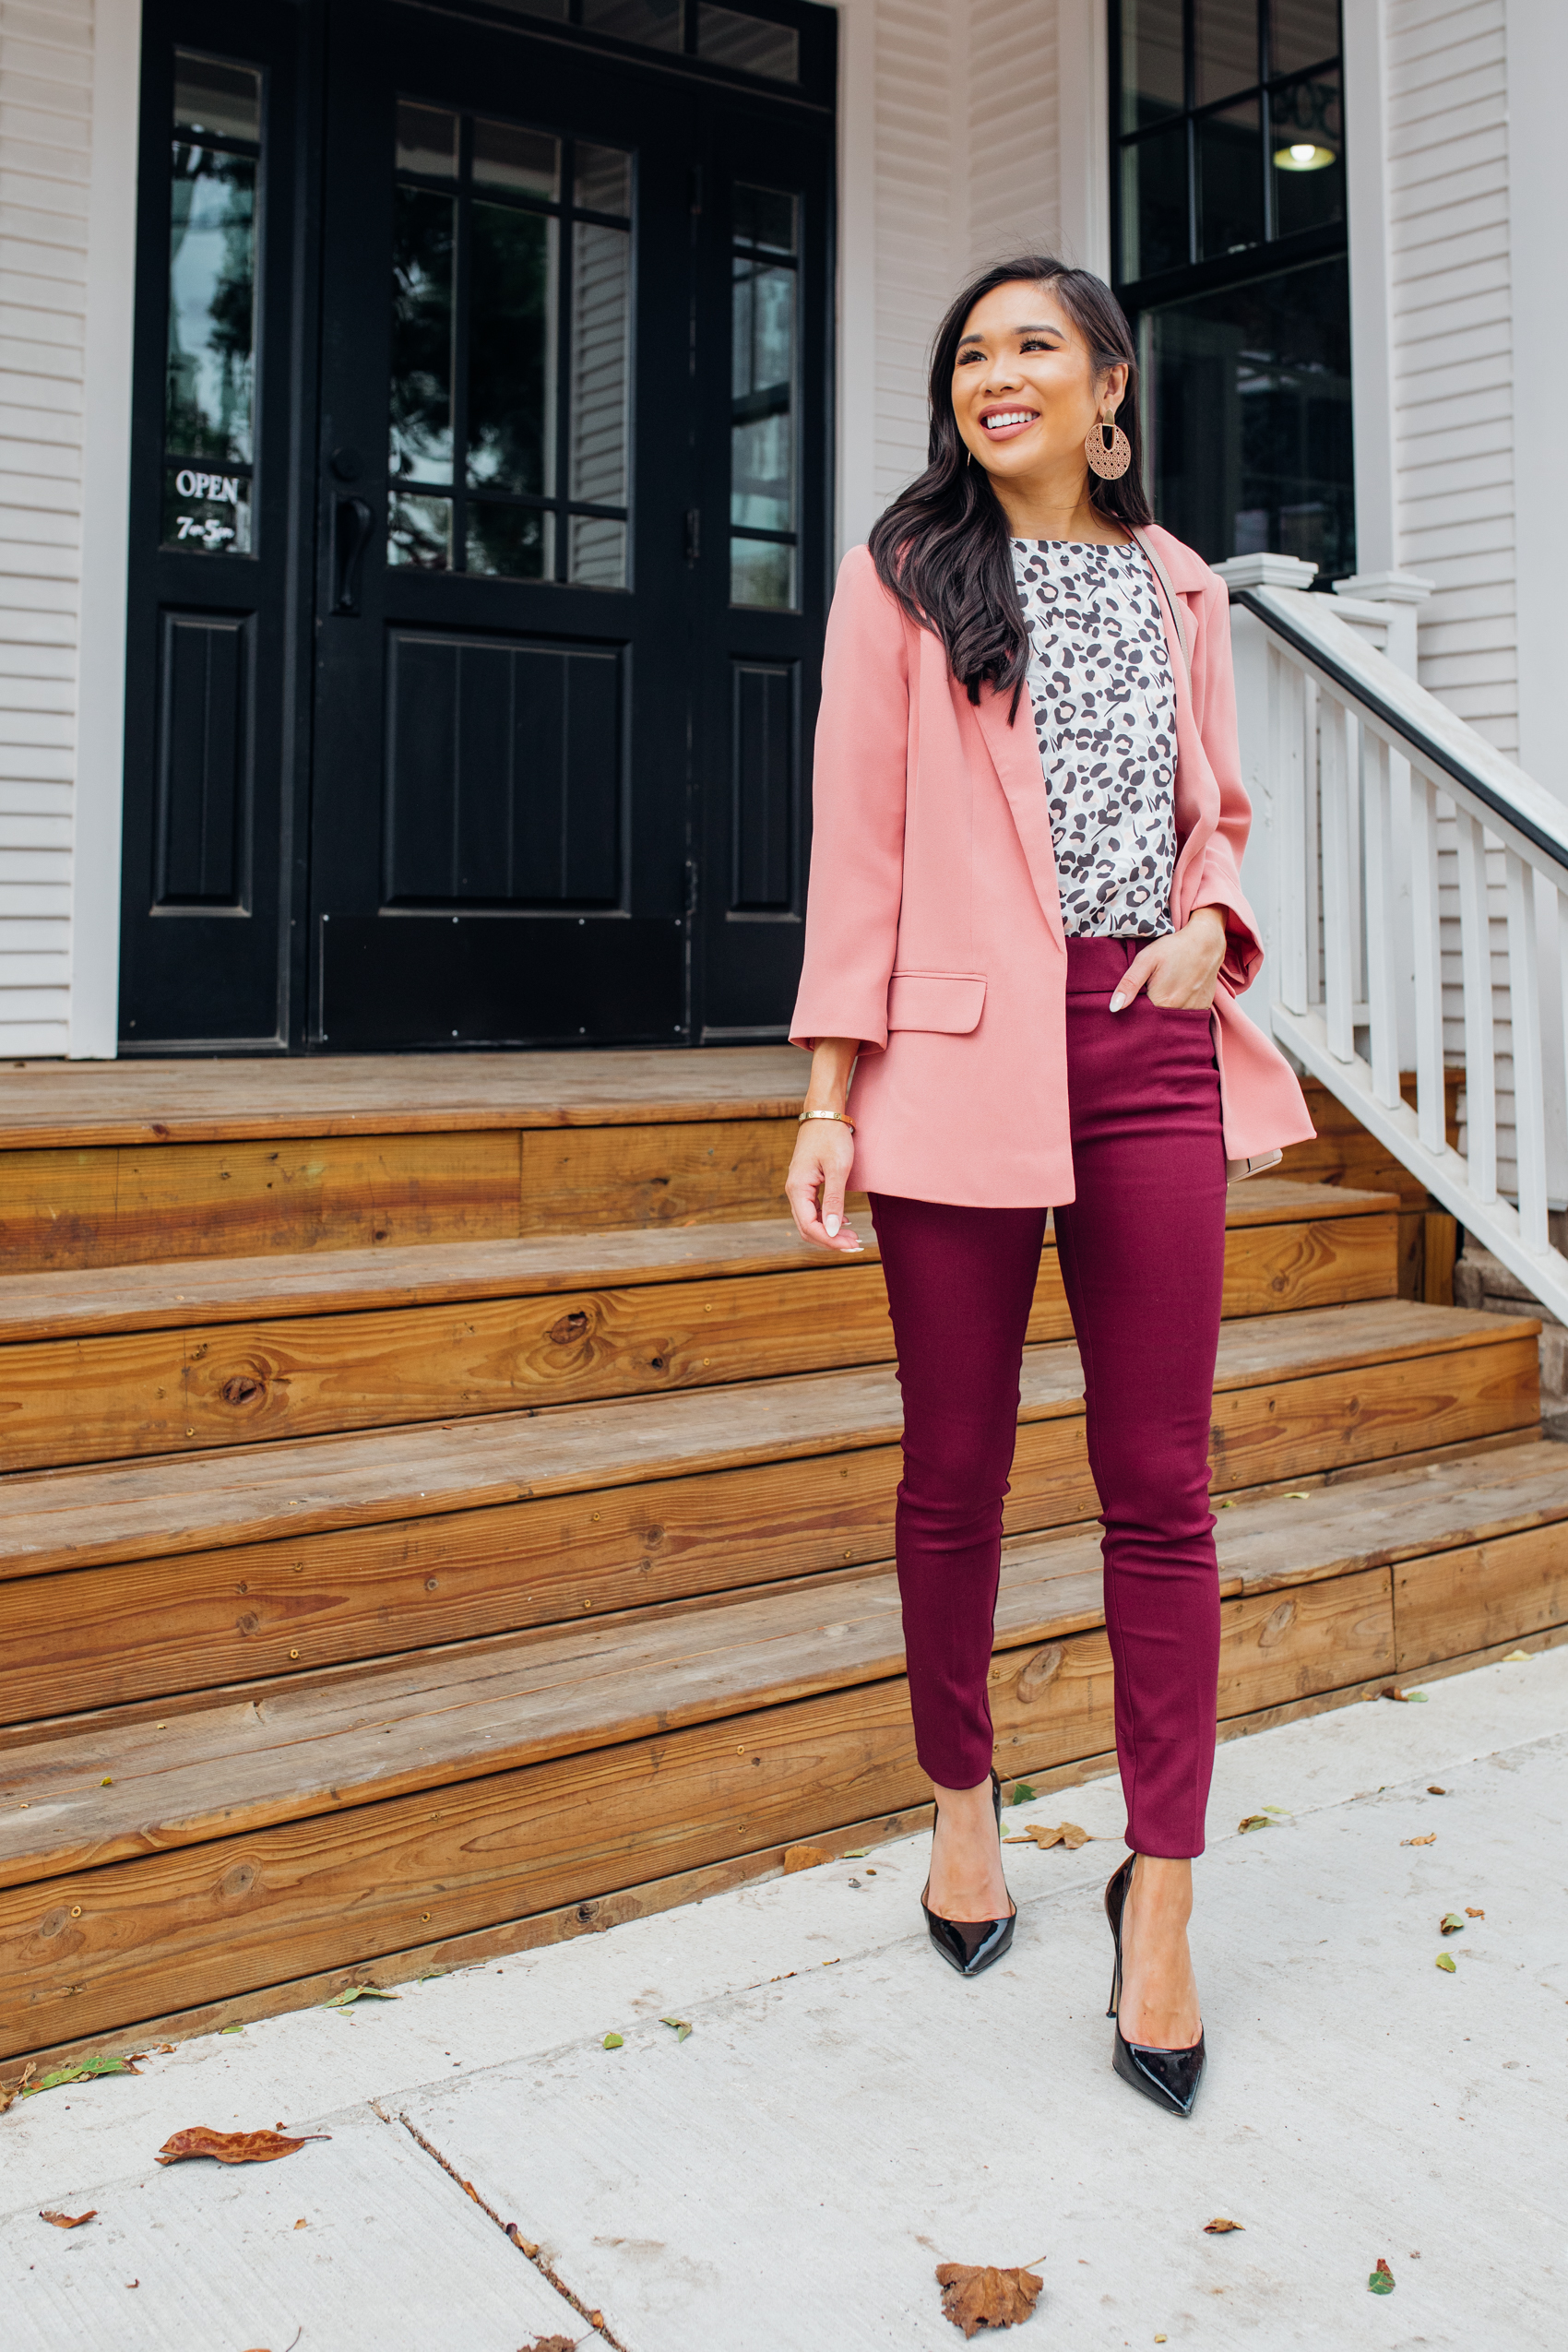 Petite workwear outfit featuring leopard print, burgundy pants and pink blazer